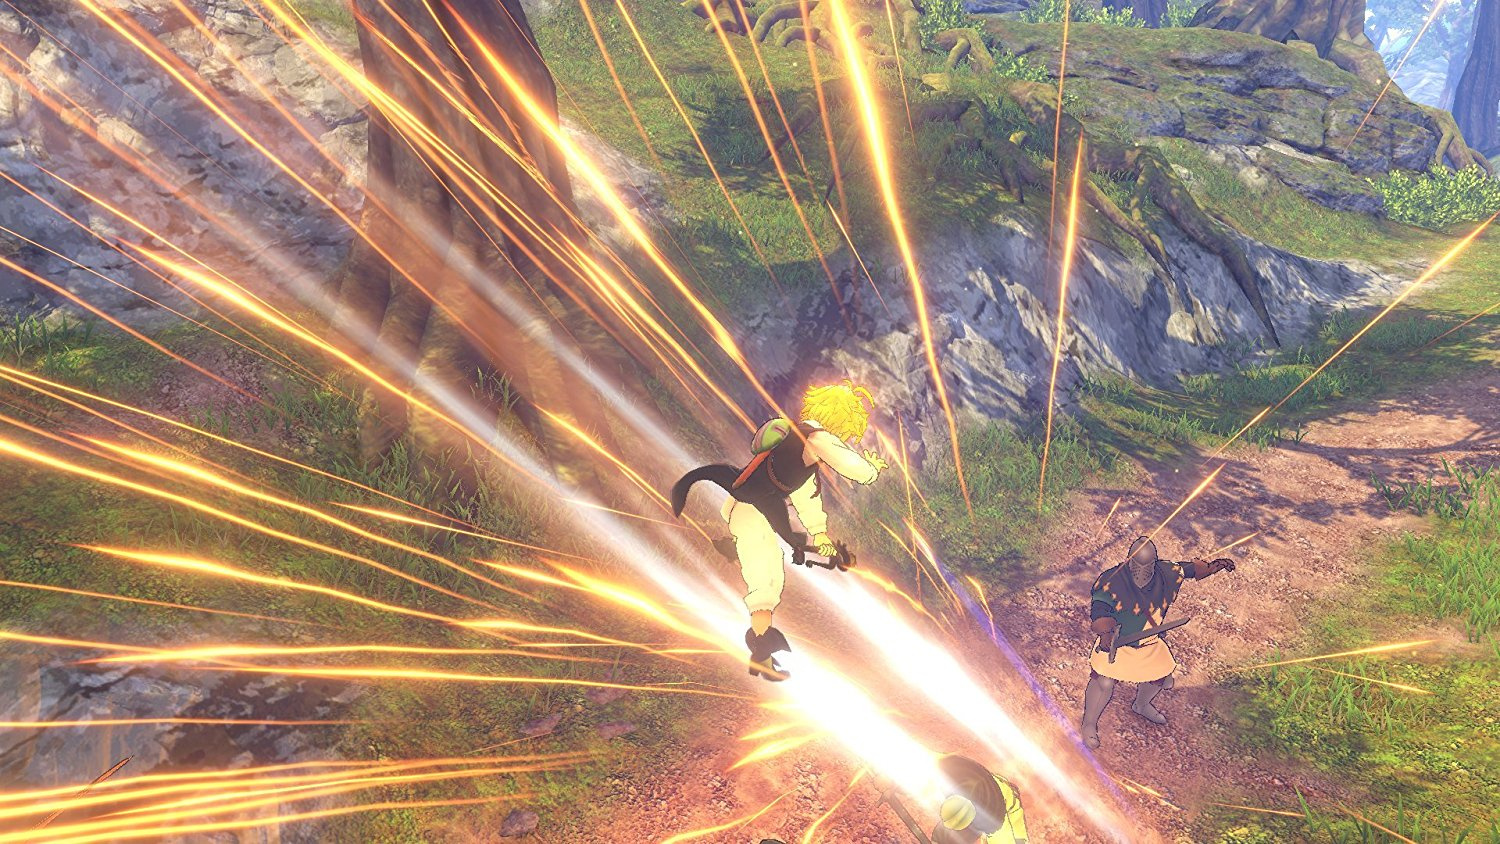 Review The Seven Deadly Sins: Knights of Britannia